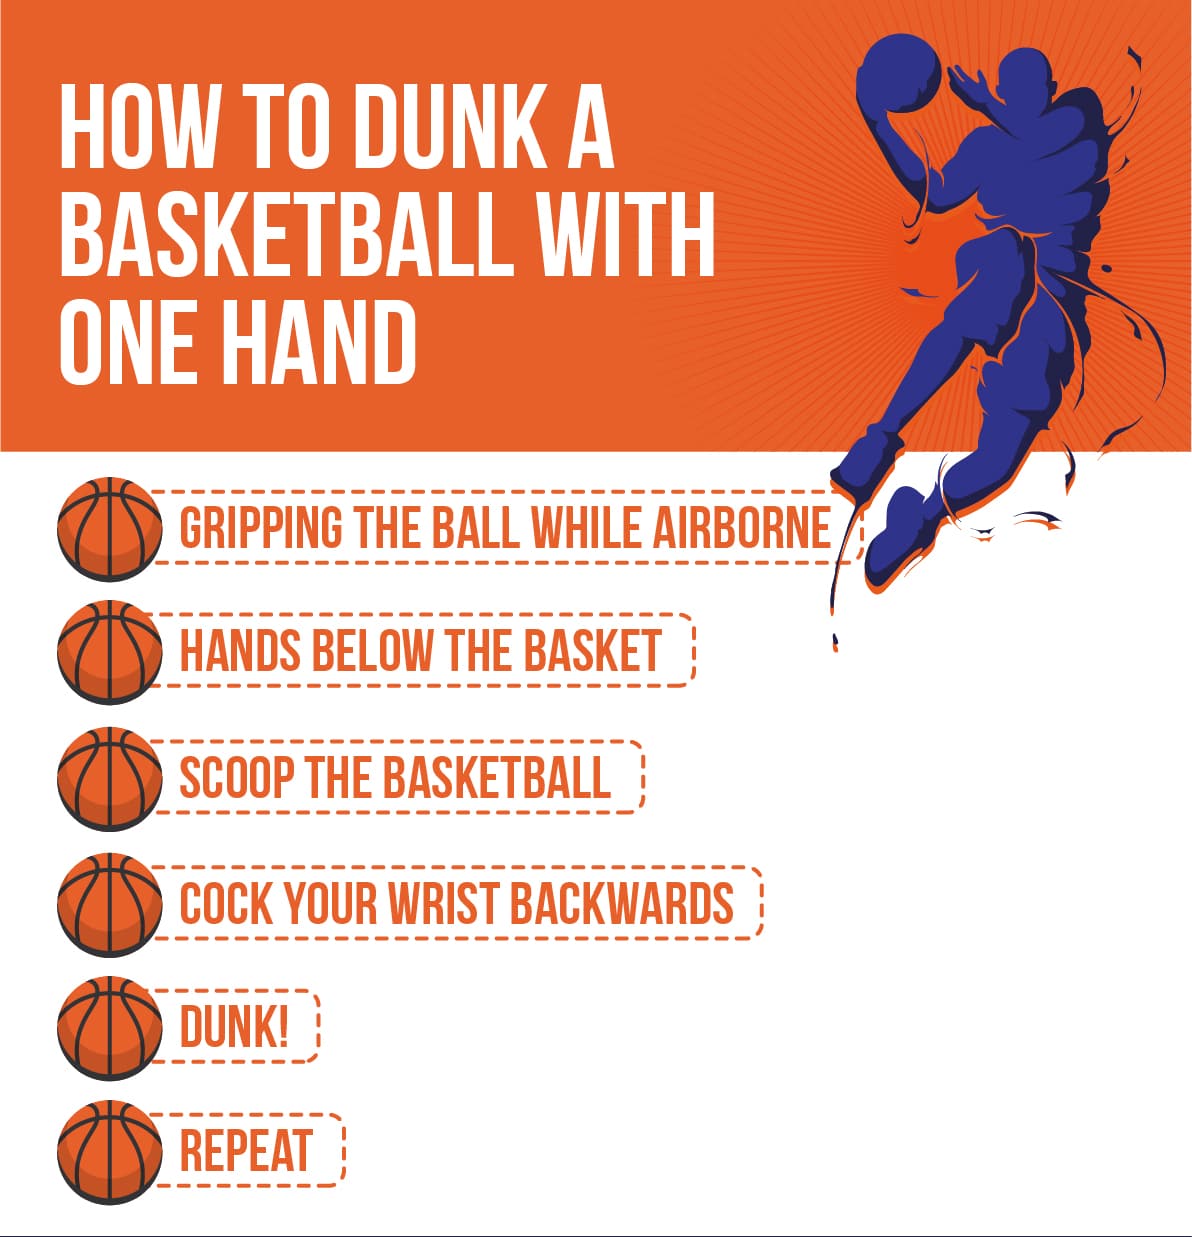 Dunking a basketball with one hand step by step